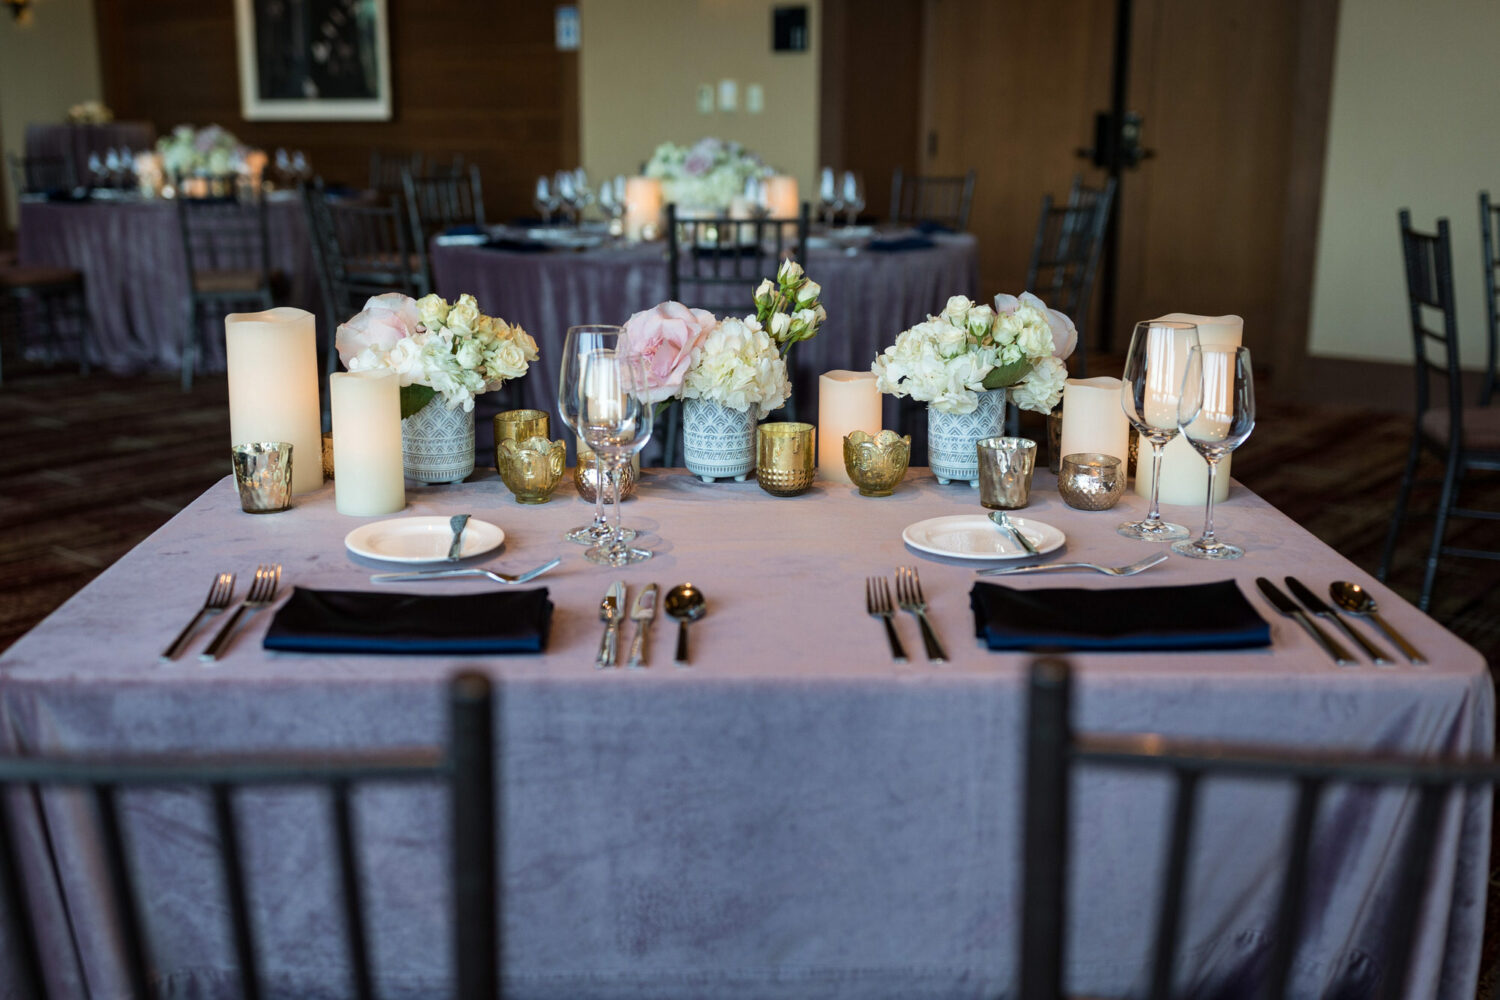 Sweetheart table setting with light purple cloth and blue napkins.